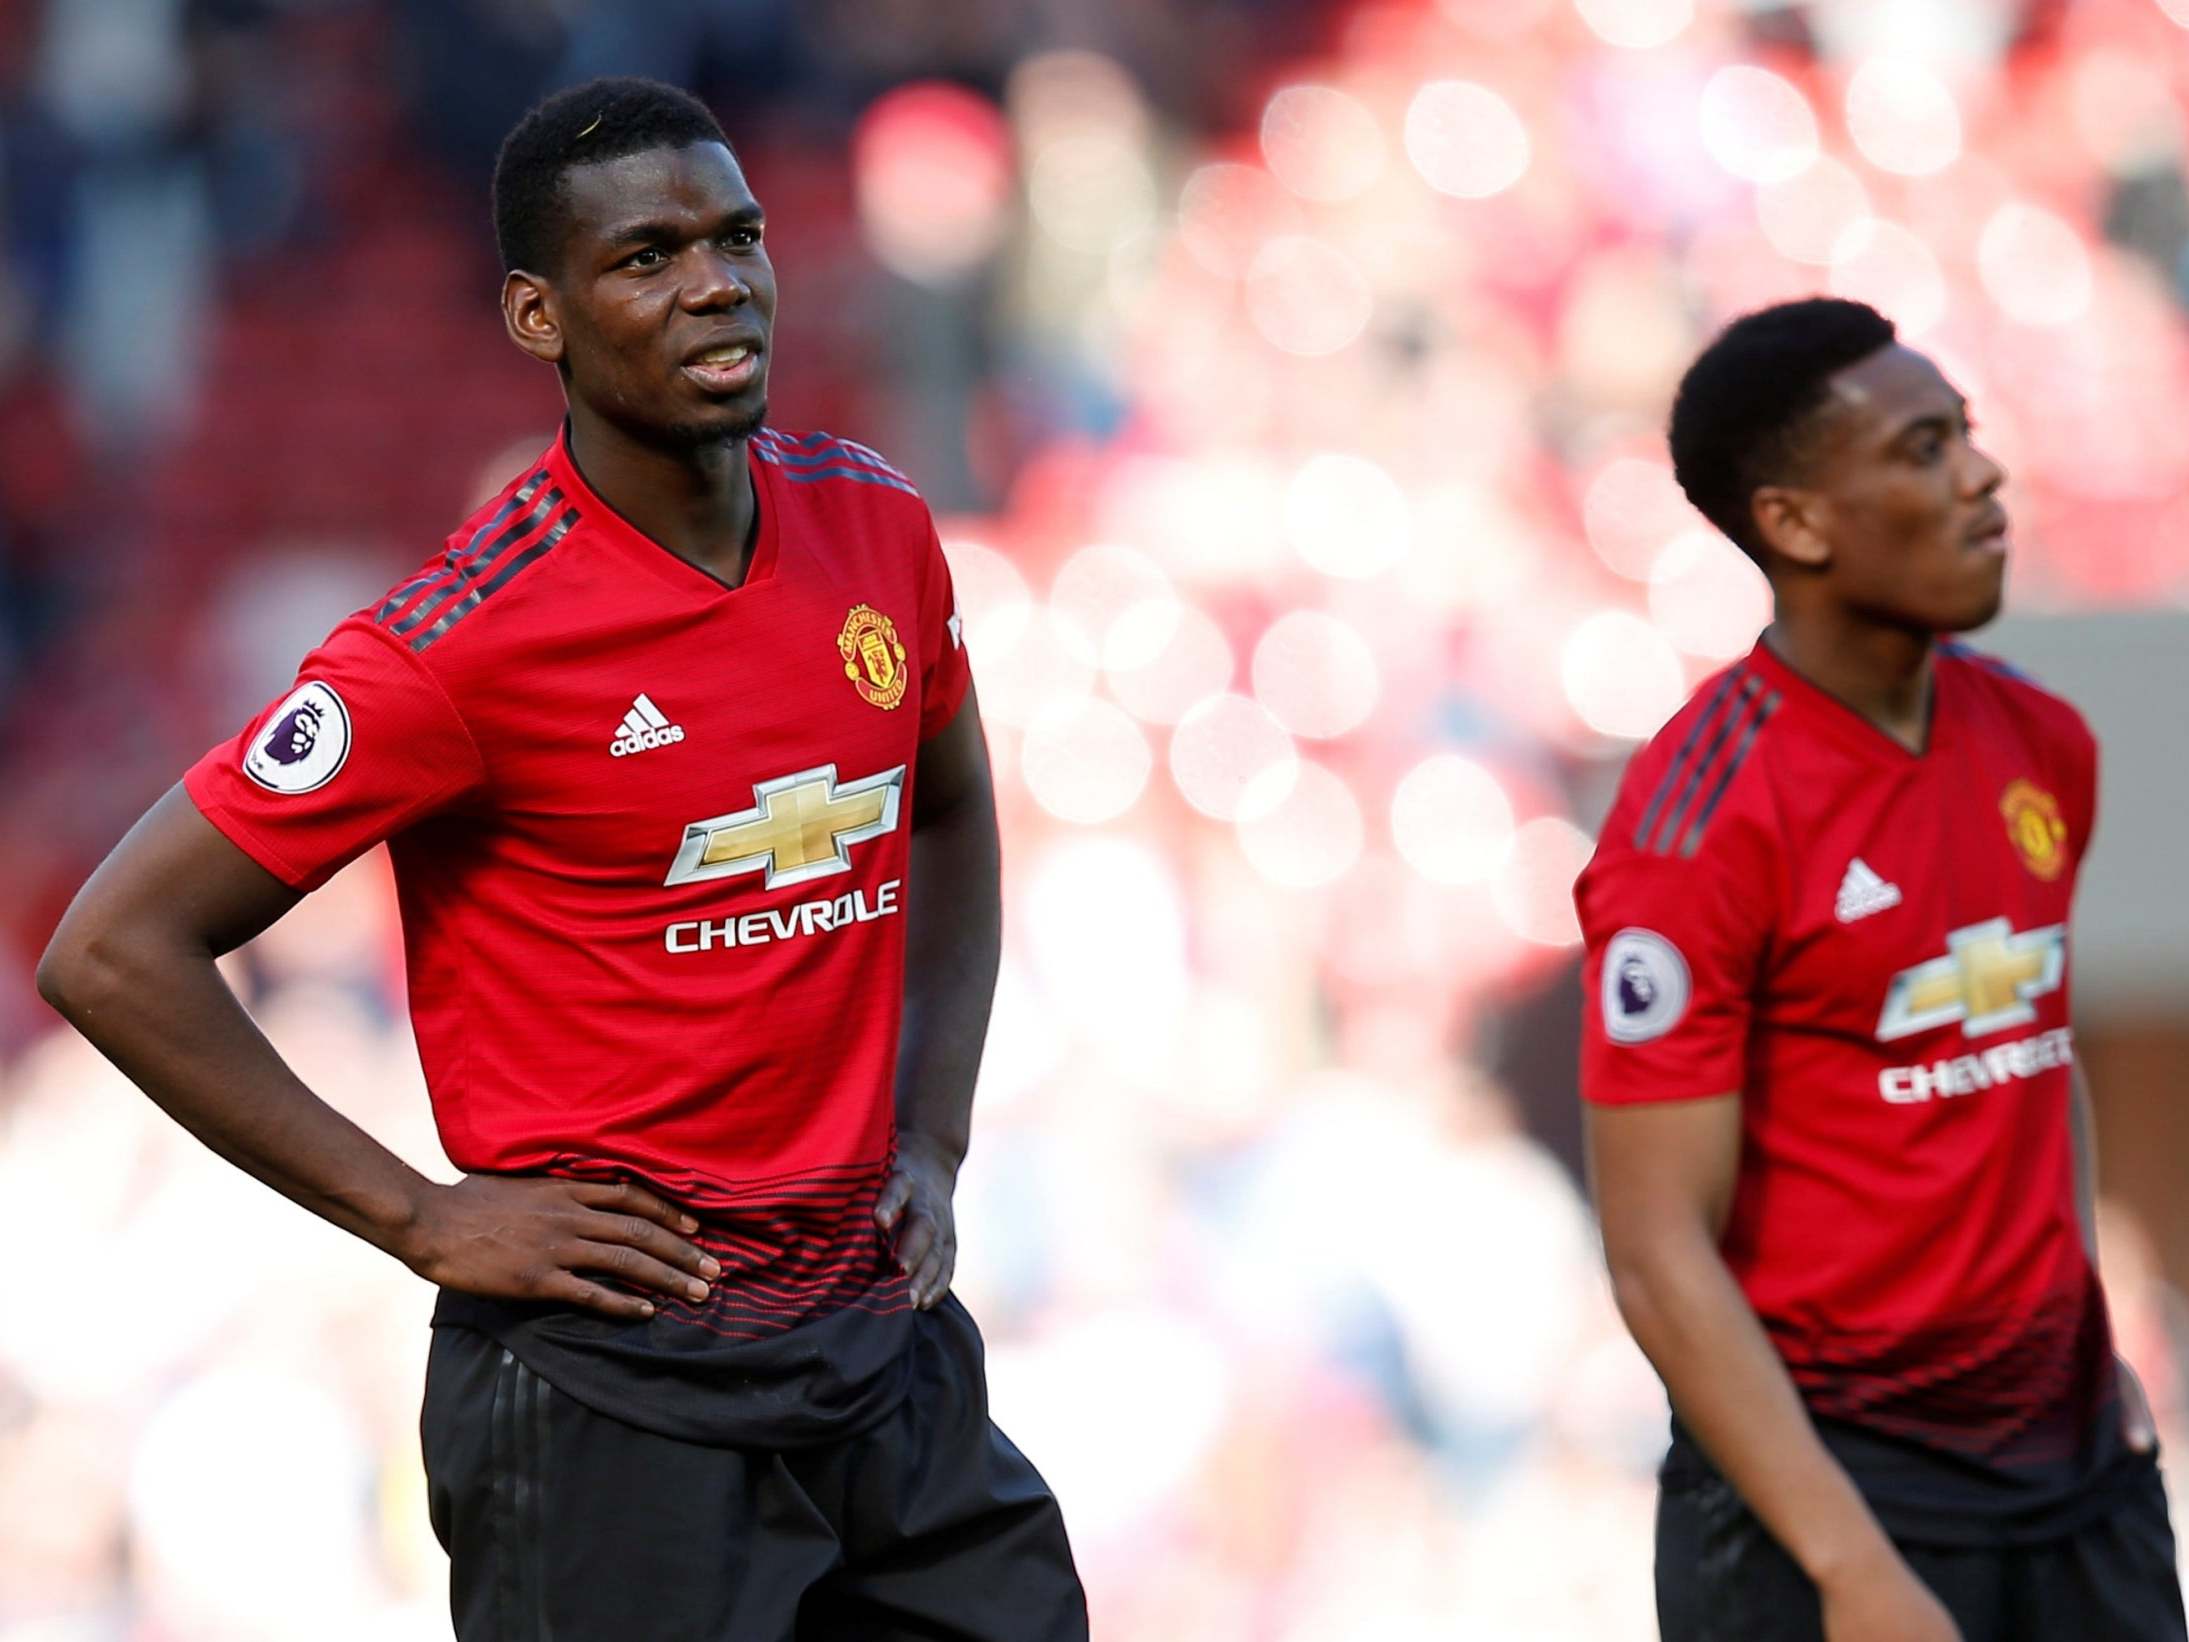 Pogba could leave Old Trafford this summer